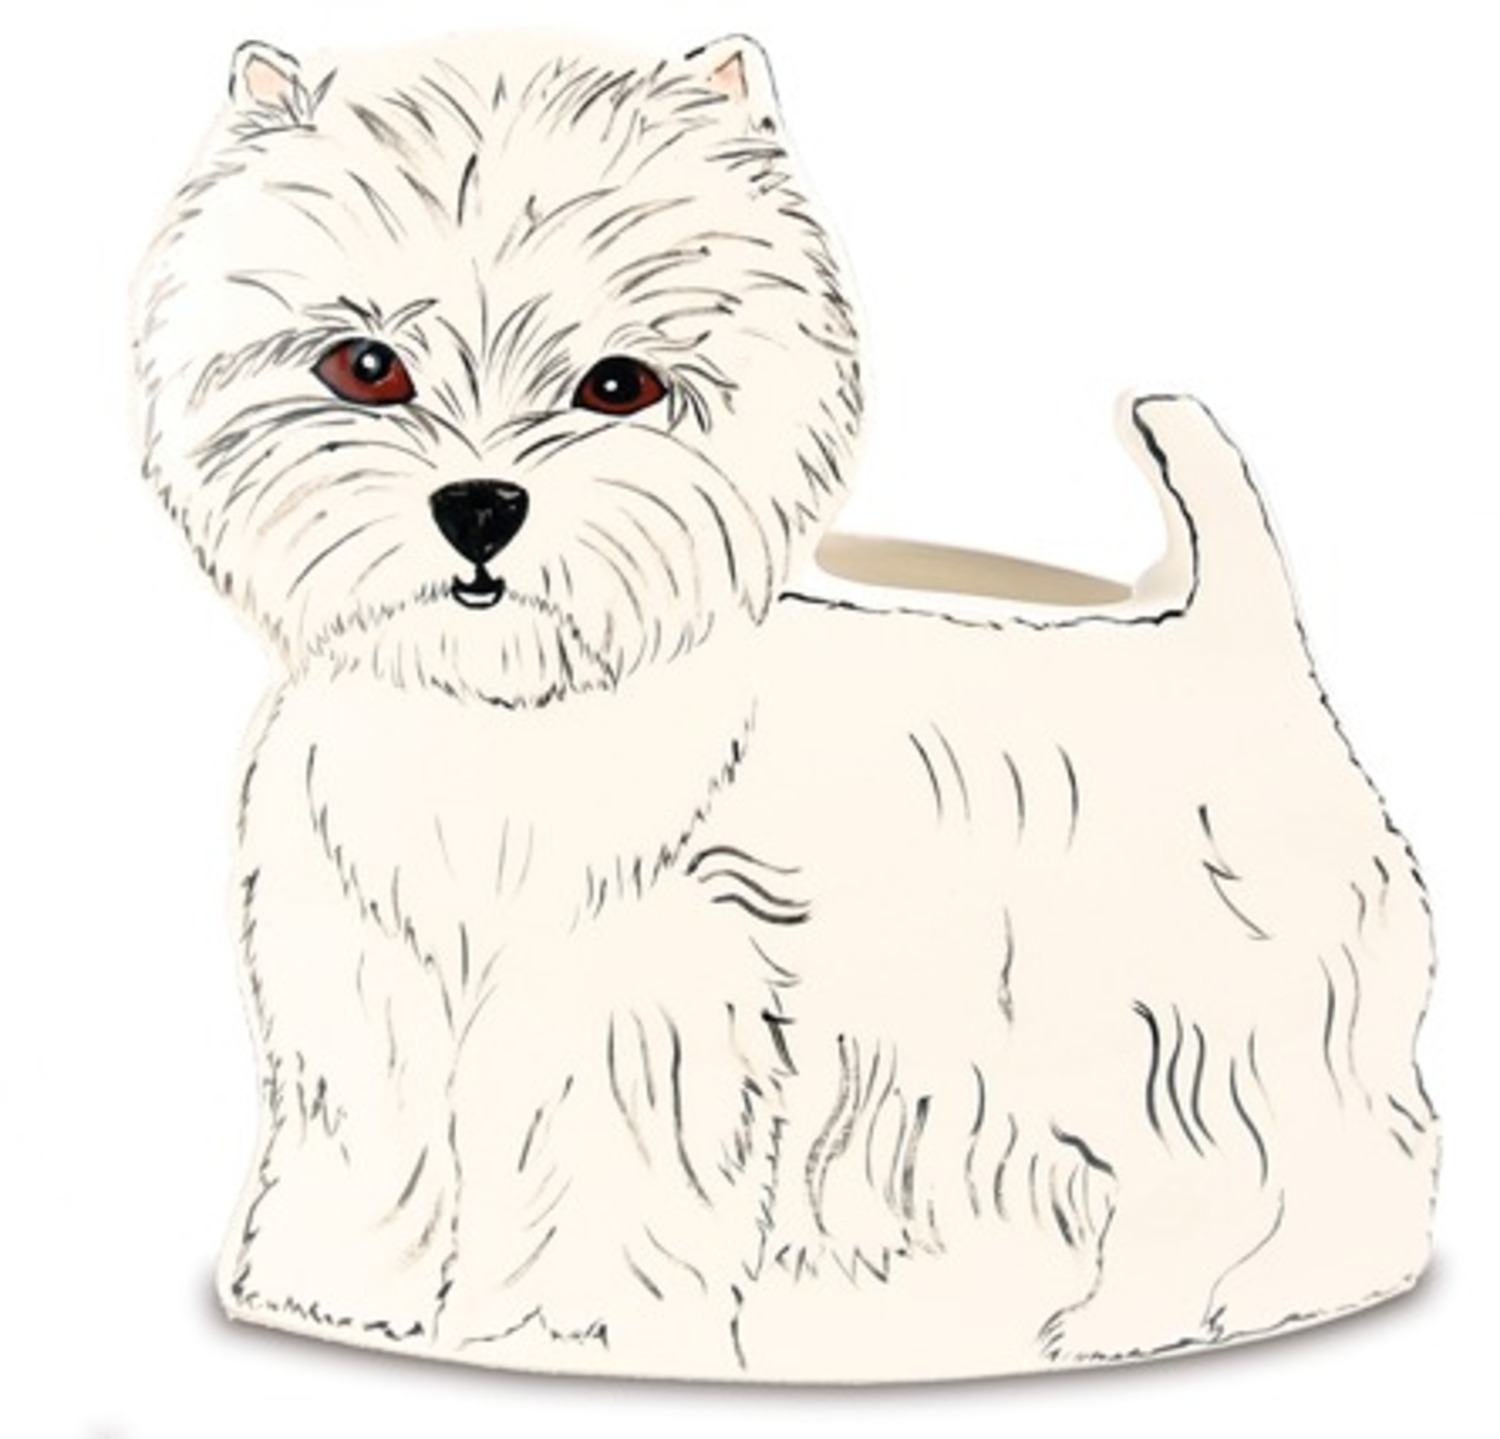 Dee Oh Gie - West Highland by Rescue Me Now - Dee Oh Gie - West Highland - 9.25" x 9" Dog Planter Vase